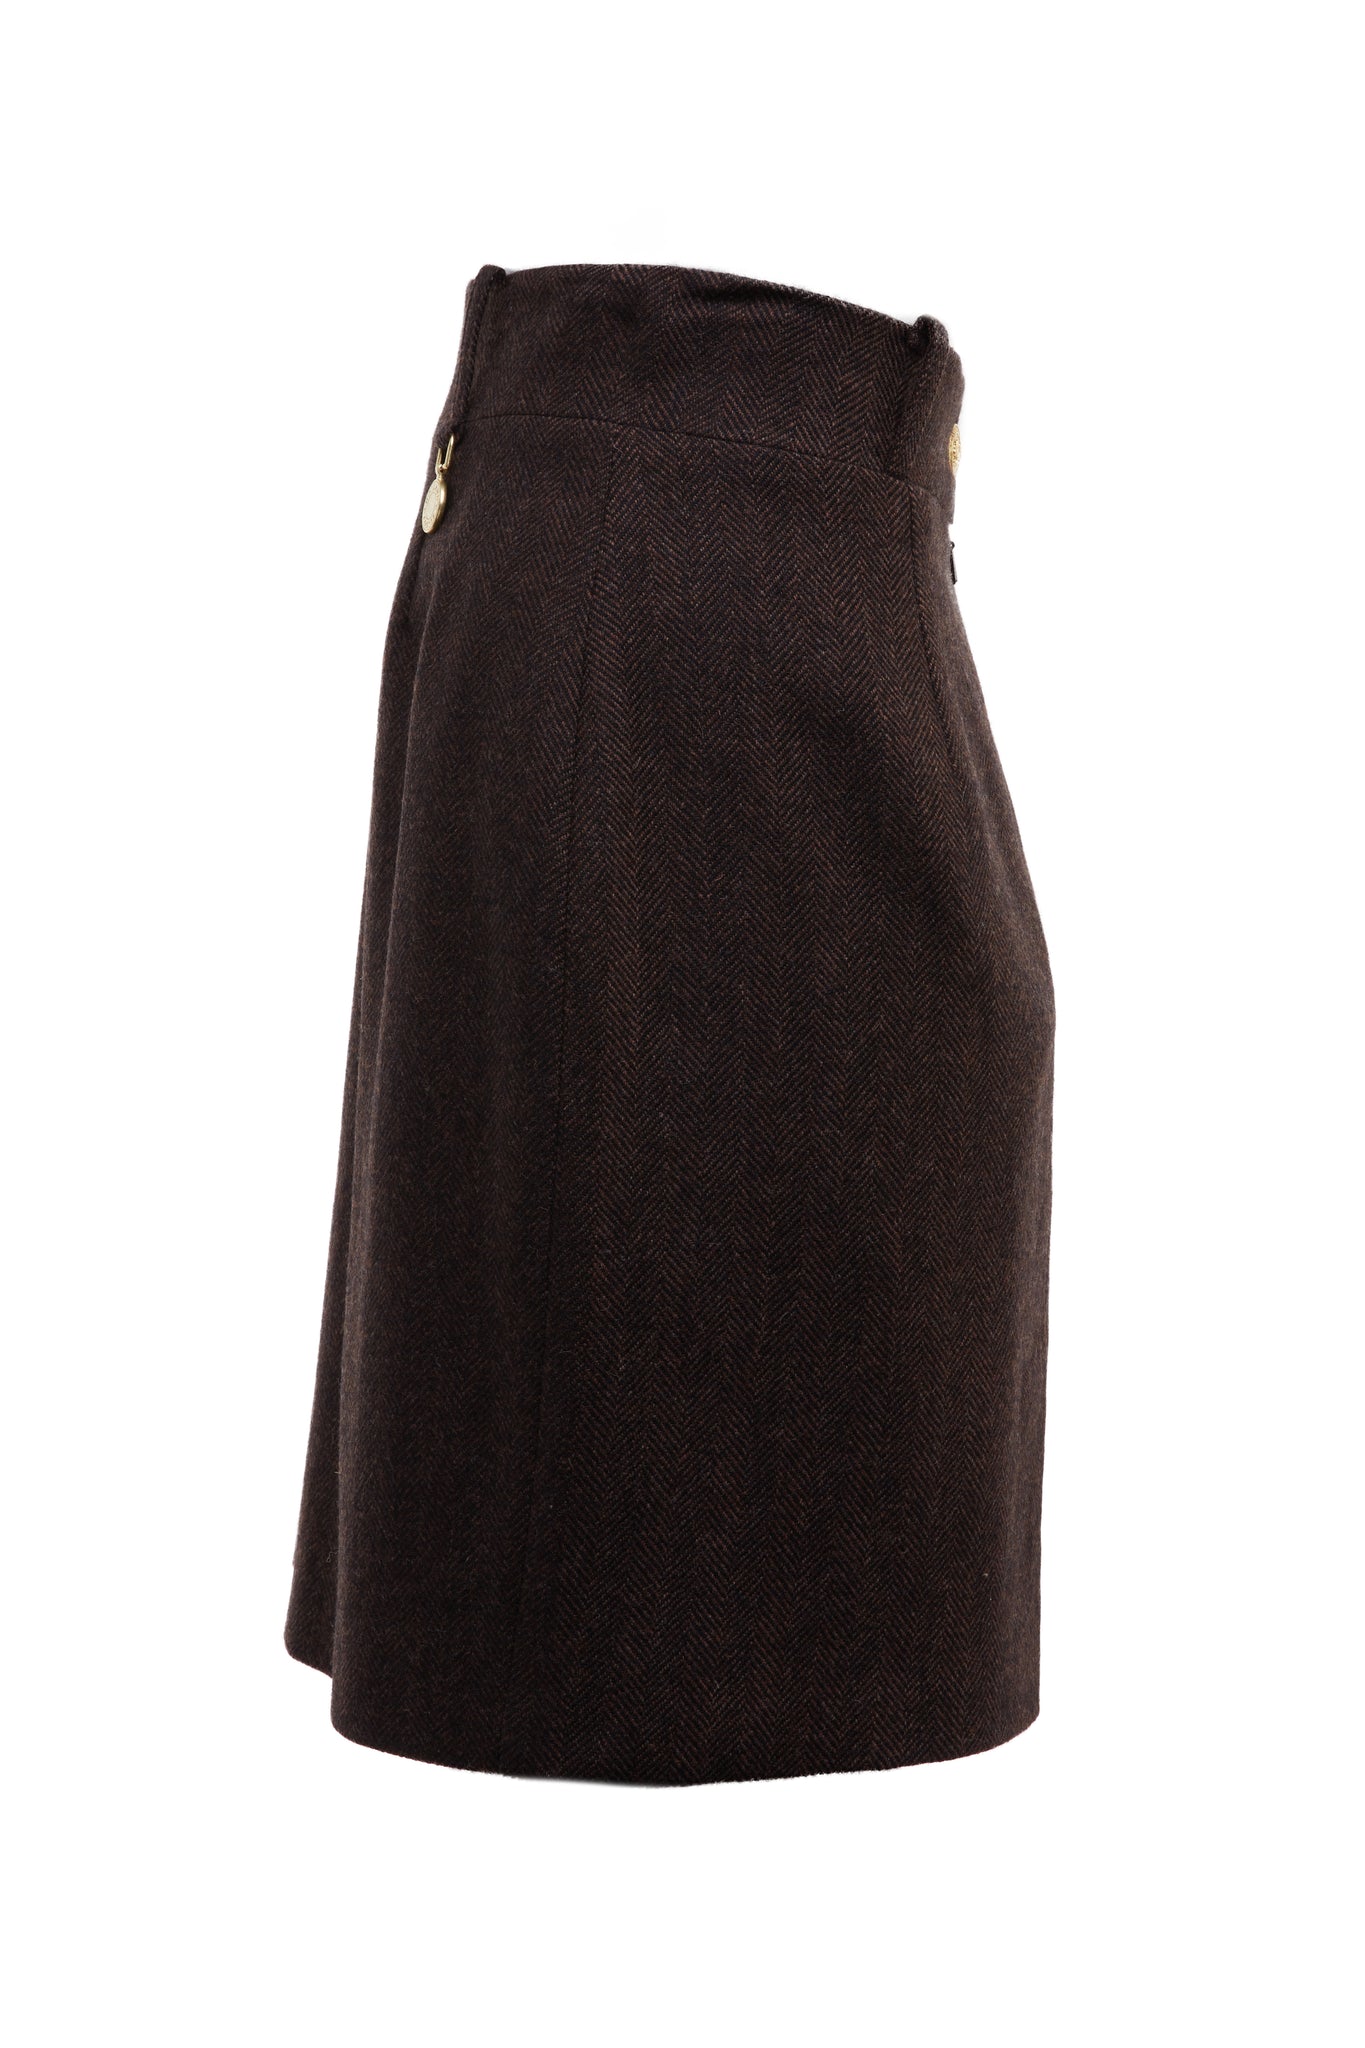 side of womens brown wool pencil mini skirt with concealed zip fastening on centre back with gold hc button above zip